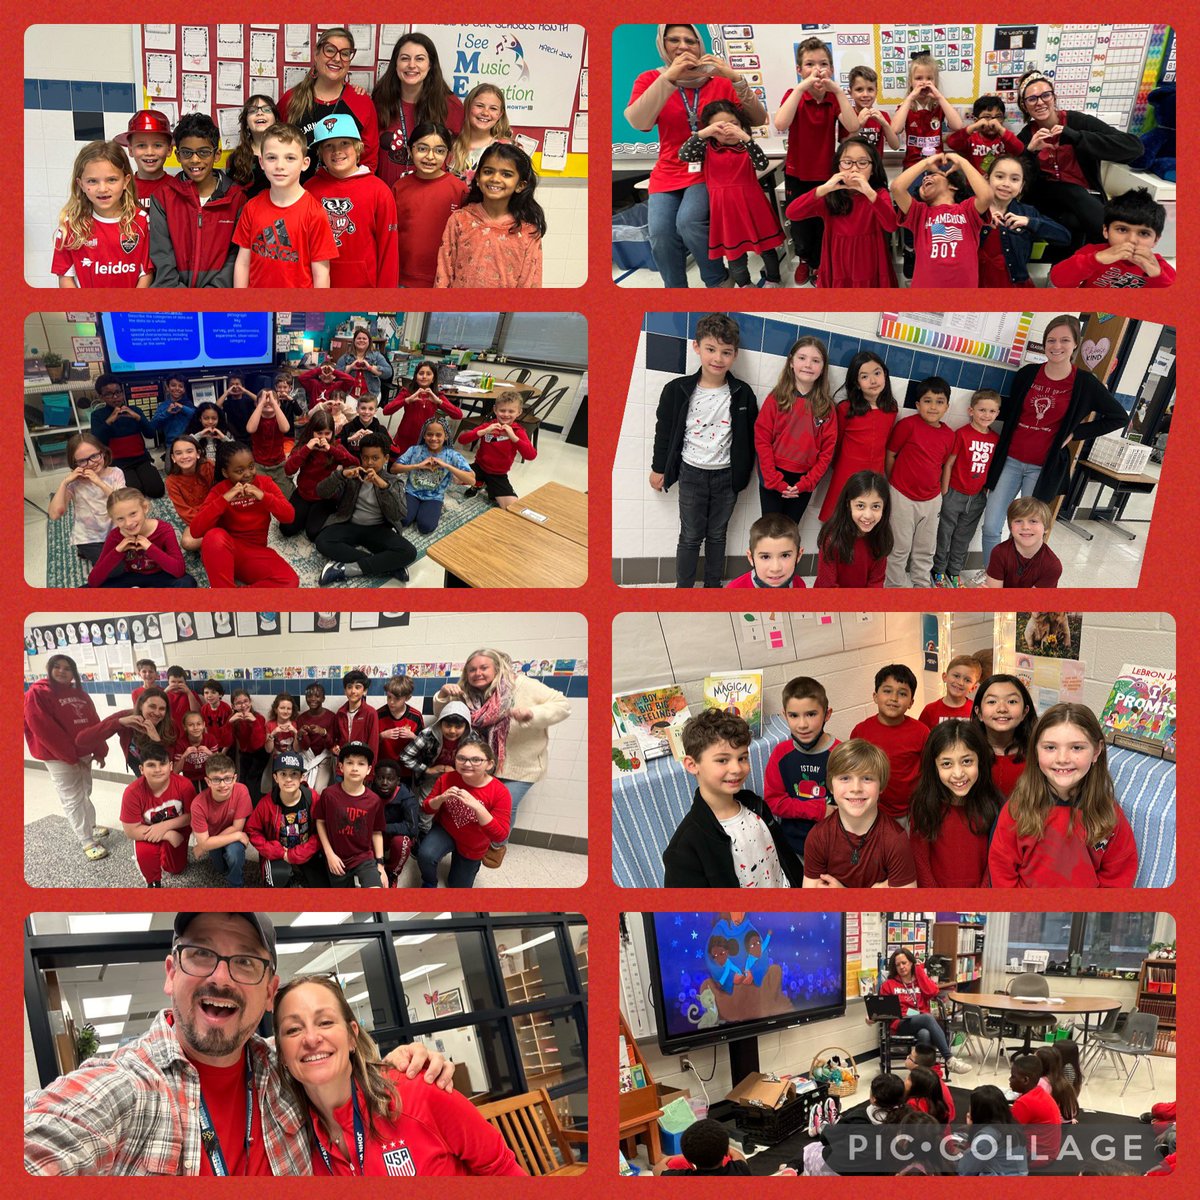 🌪️ Tolbert Tornados are proud to wear red in honor of Autism Acceptance Month this April! Together, we celebrate neurodiversity and inclusion! #AutismAcceptance #bettertogether ❤️🌪️❤️